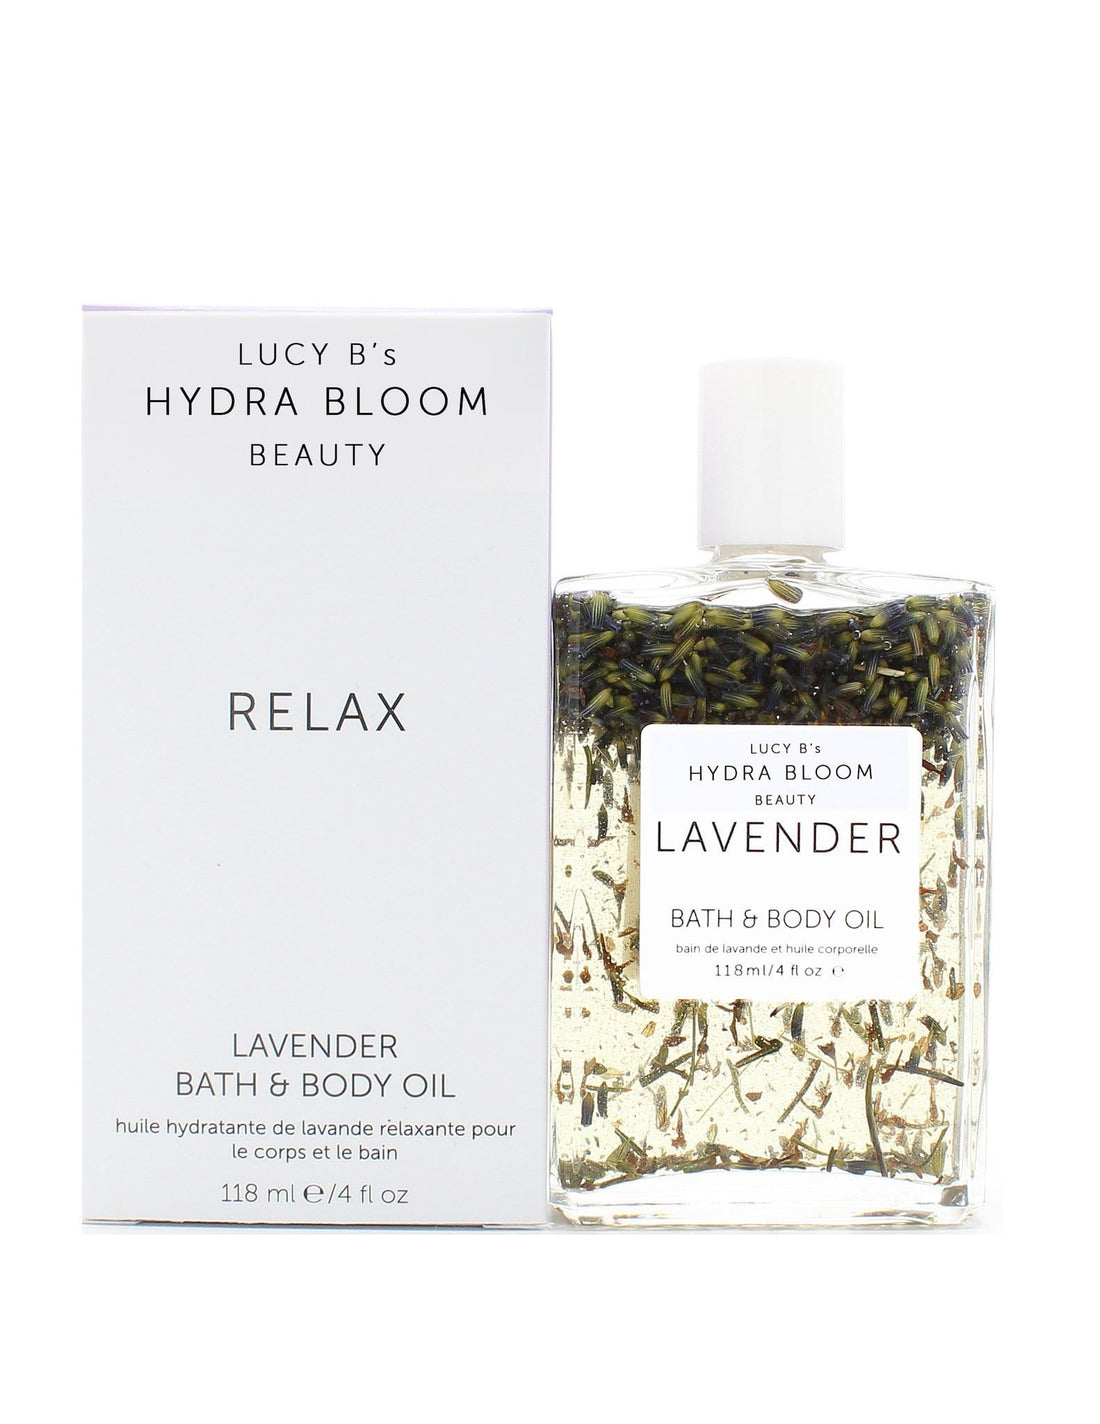 Lucy B's + HYDRA BLOOM Hydra Bloom Lavender Relax Bath and Body Oil